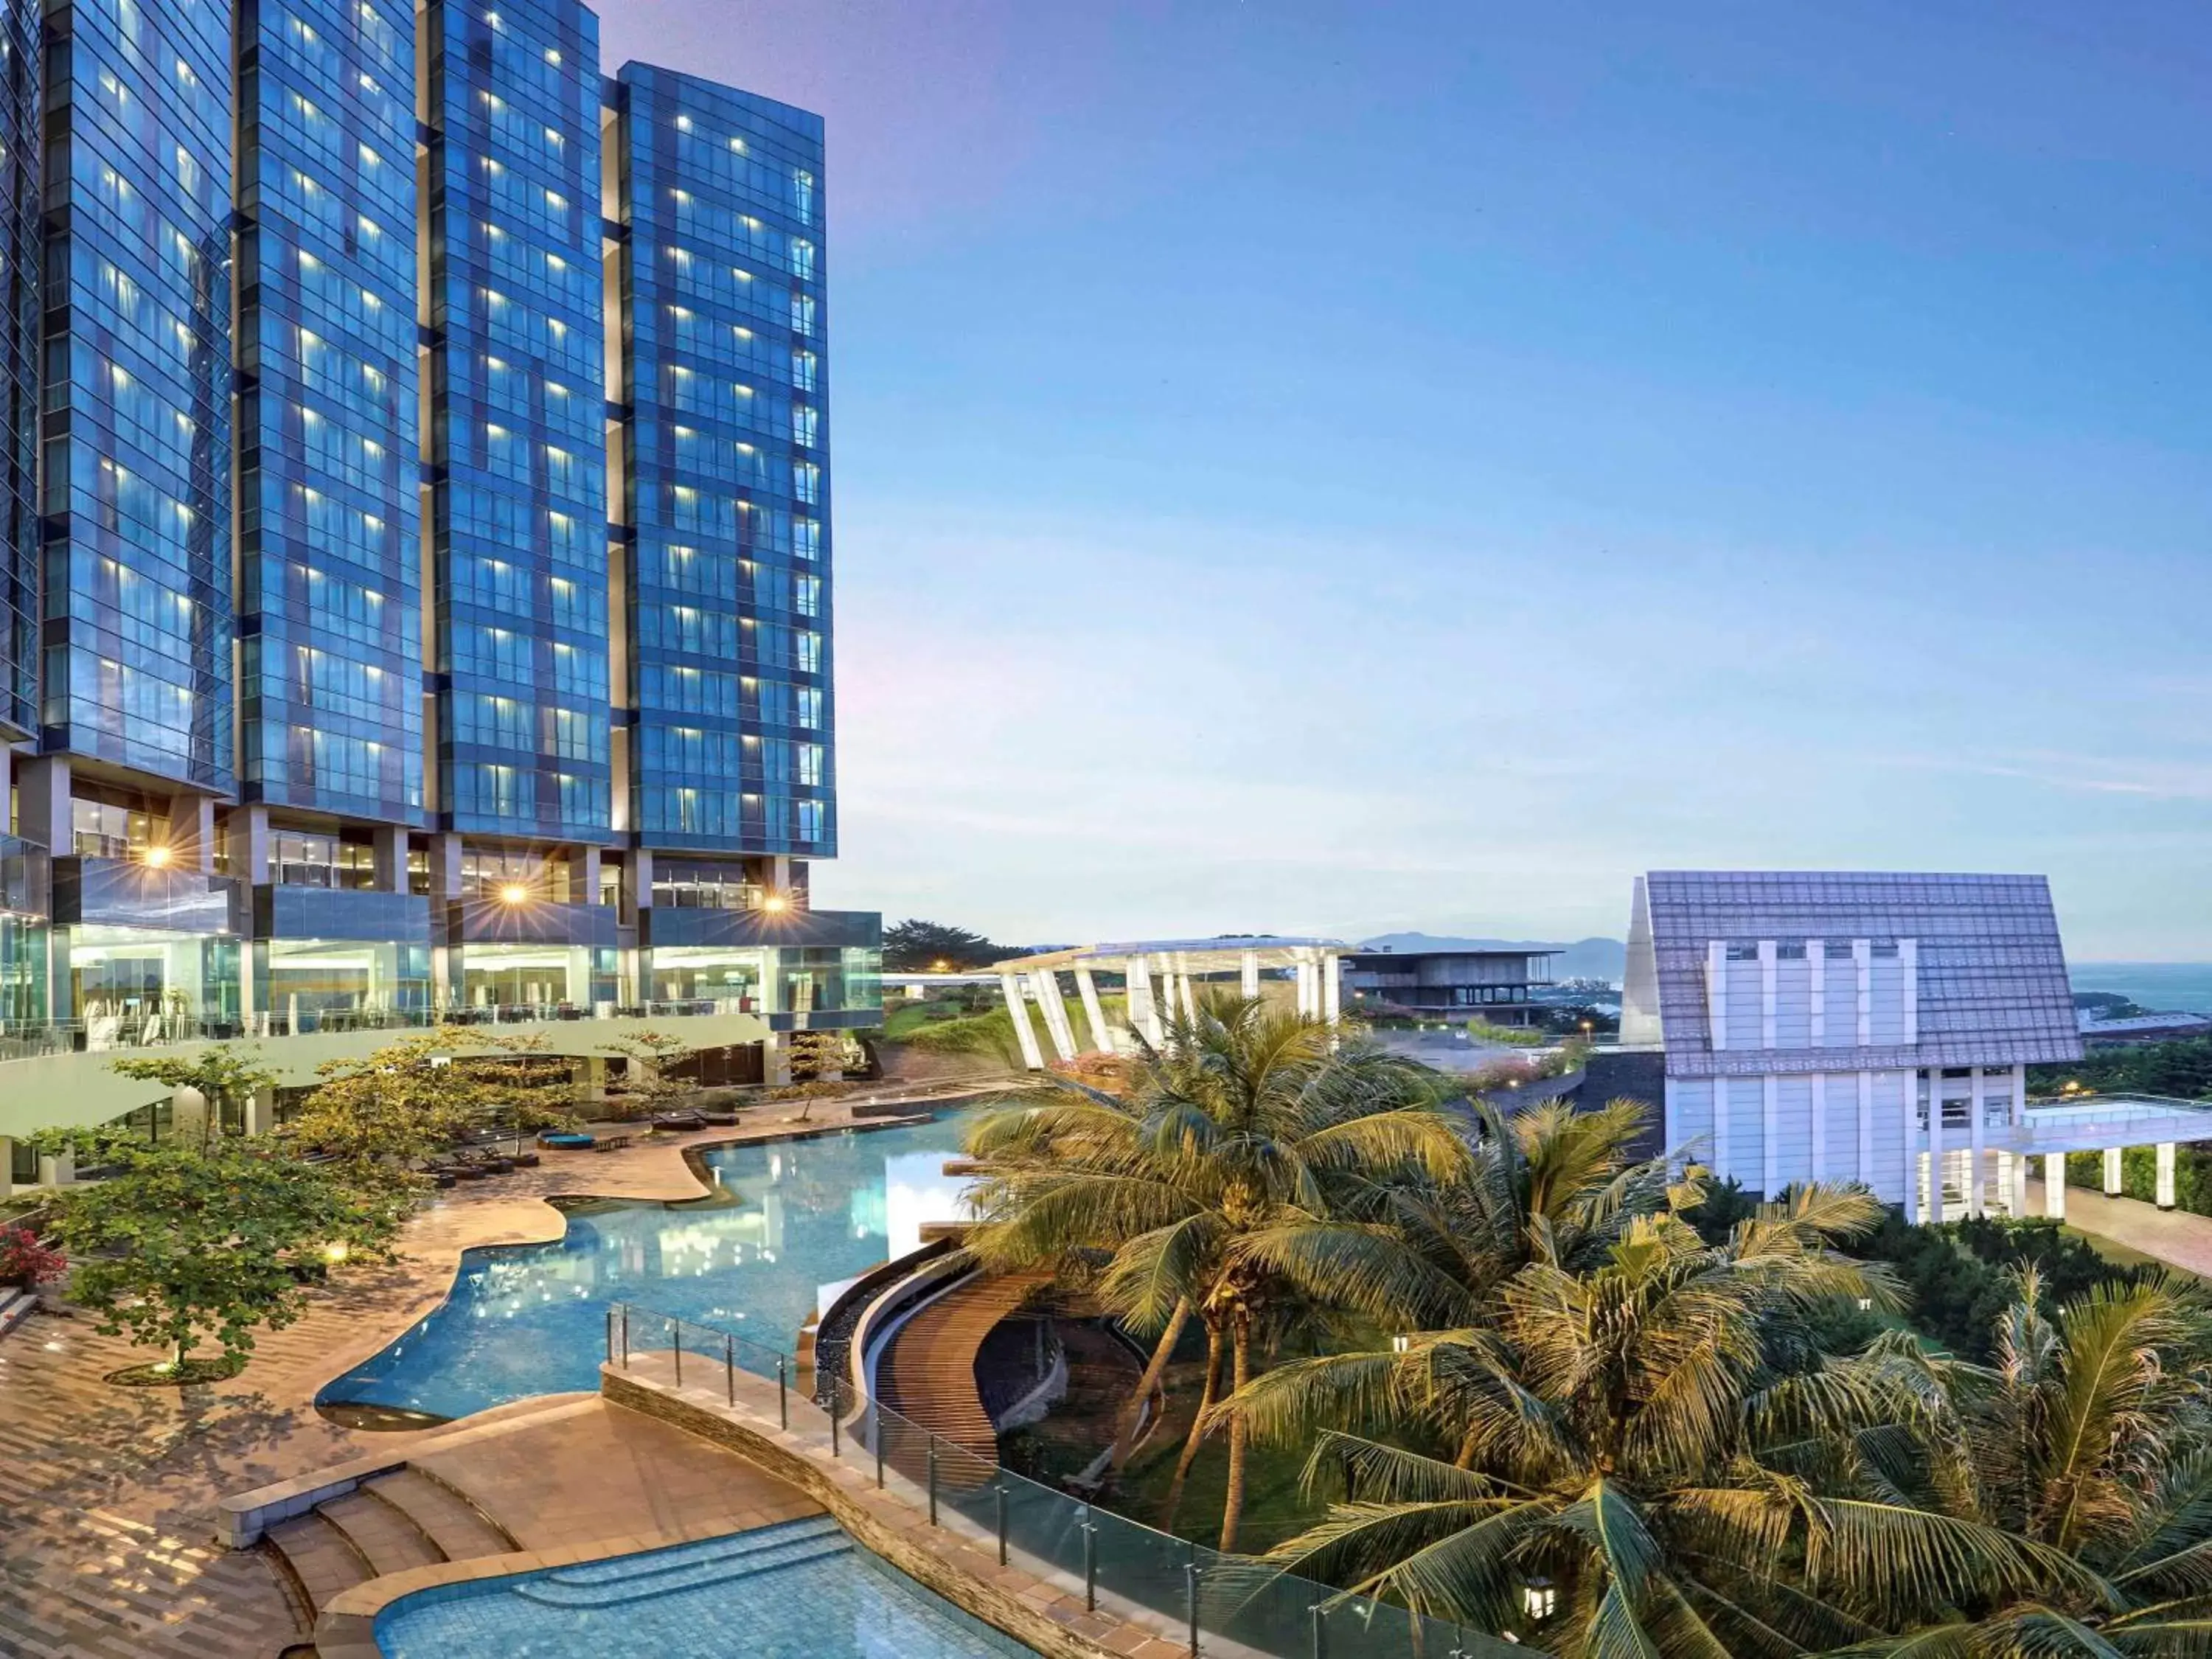 Property building, Pool View in Novotel Lampung